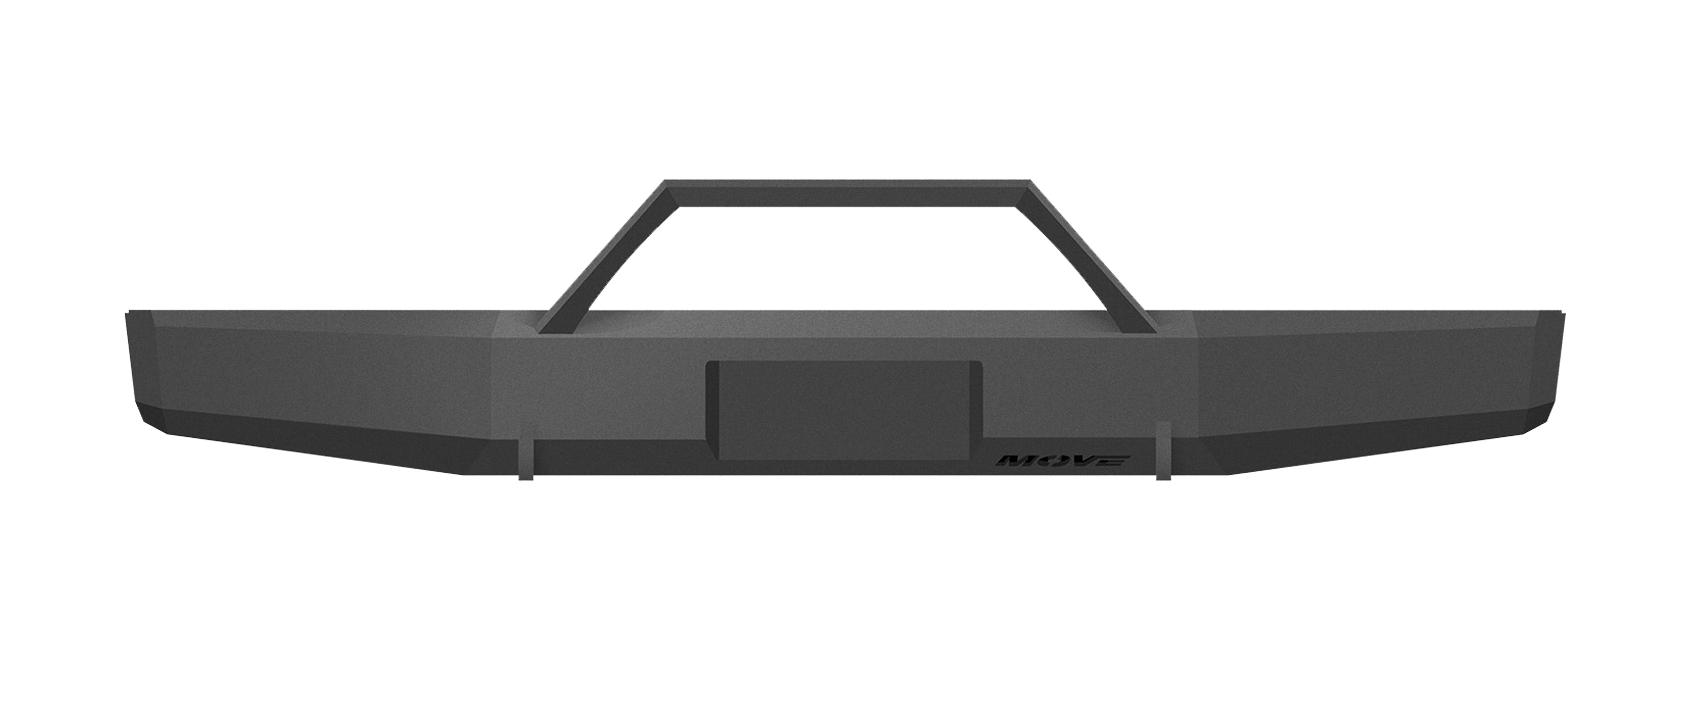 Heritage Square Force Front Bumper Kit - MOVE Bumpers | contain